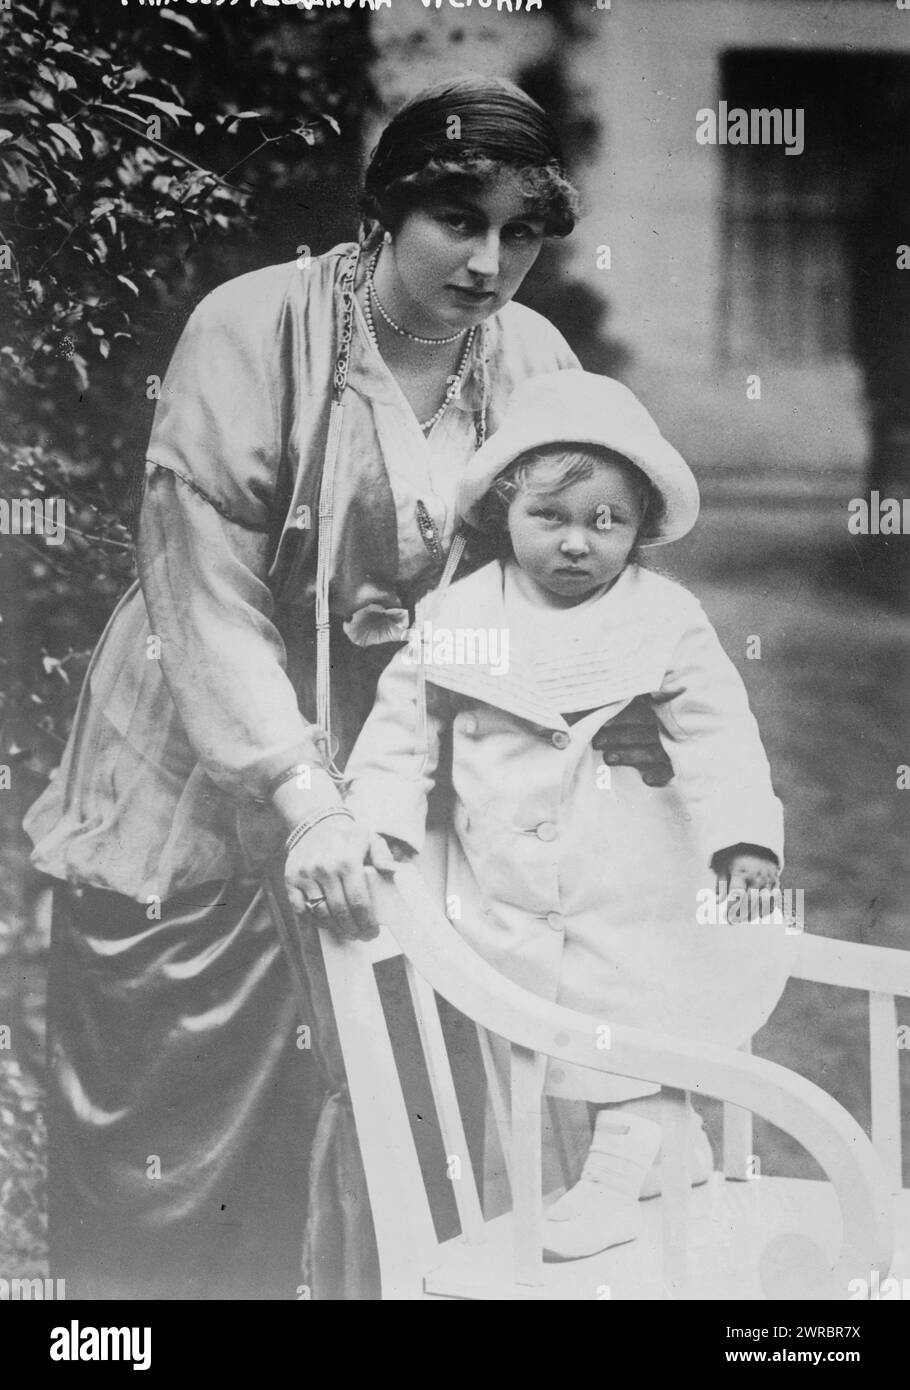 Princess Alexandra Victoria, Photograph shows Princess Alexandra Victoria of Schleswig-Holstein-Sonderburg-Glücksburg (1887-1957) with her son Prince Alexander Ferdinand of Prussia (1912-1985)., between ca. 1915 and 1917, Glass negatives, 1 negative: glass Stock Photo